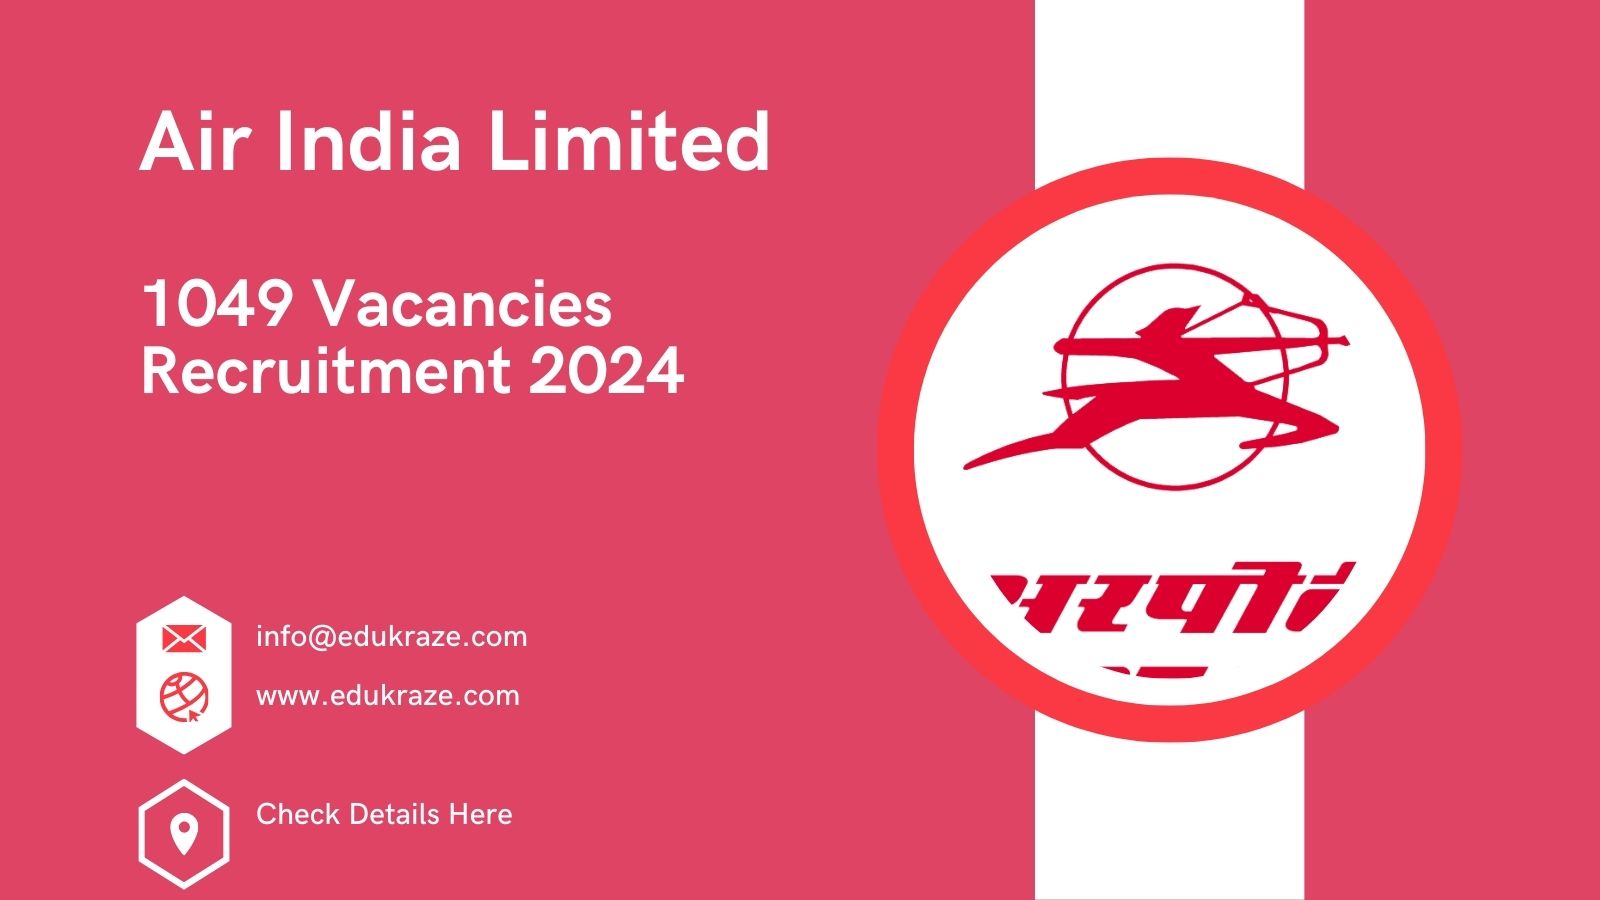 Air India Airport Services Limited Recruitment Out For 1000+ Vacancies!